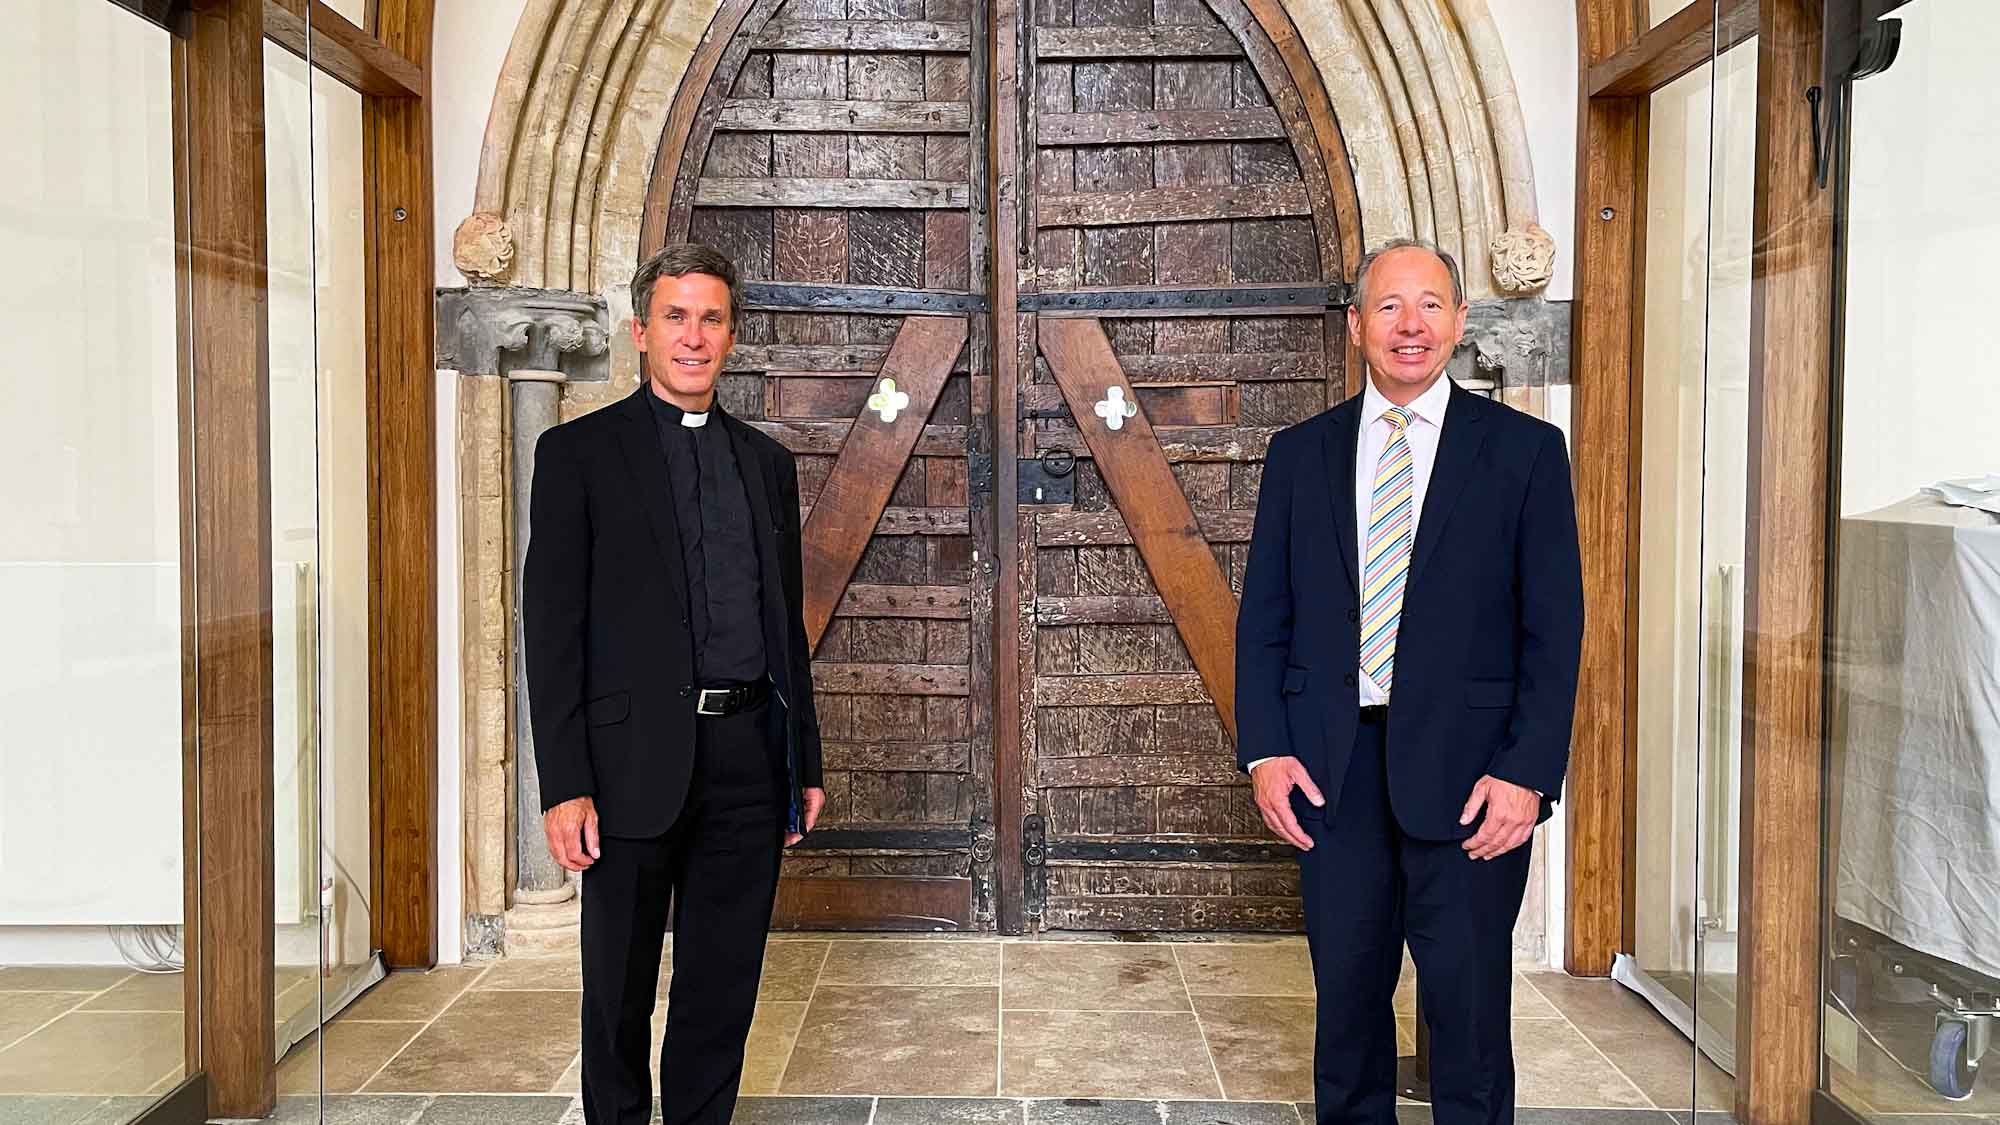 Paul Playford and Canon Chris Palmer standing in front of new glass lobby